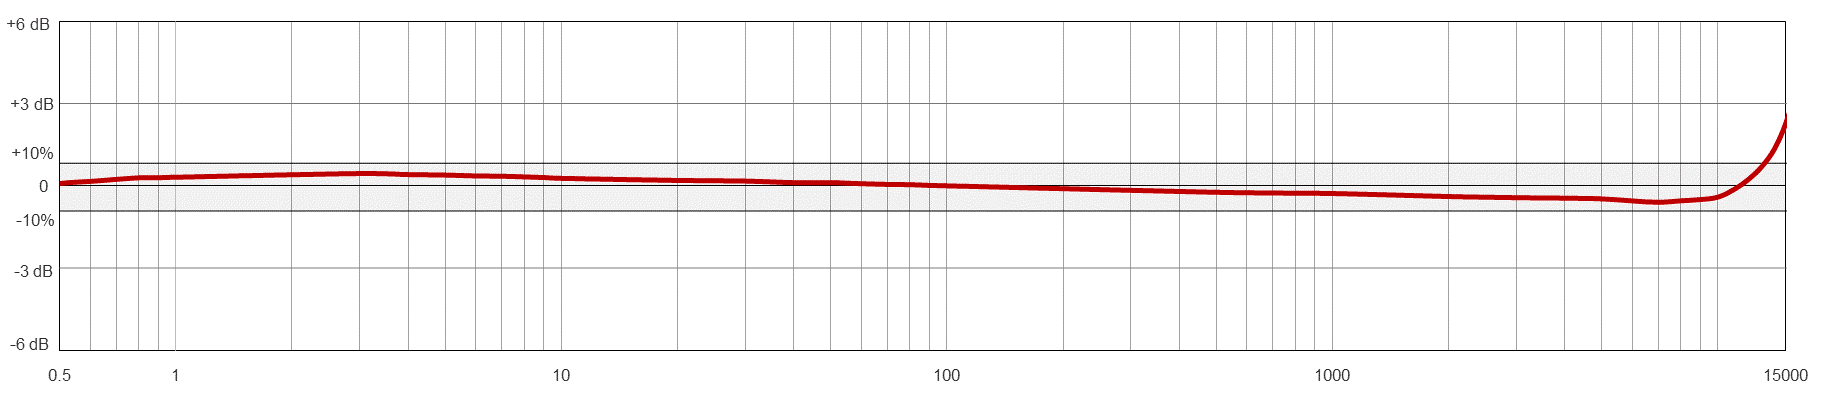 A line graph showing the frequency resopnse of a CTC AC915 condition monitoring sensor.